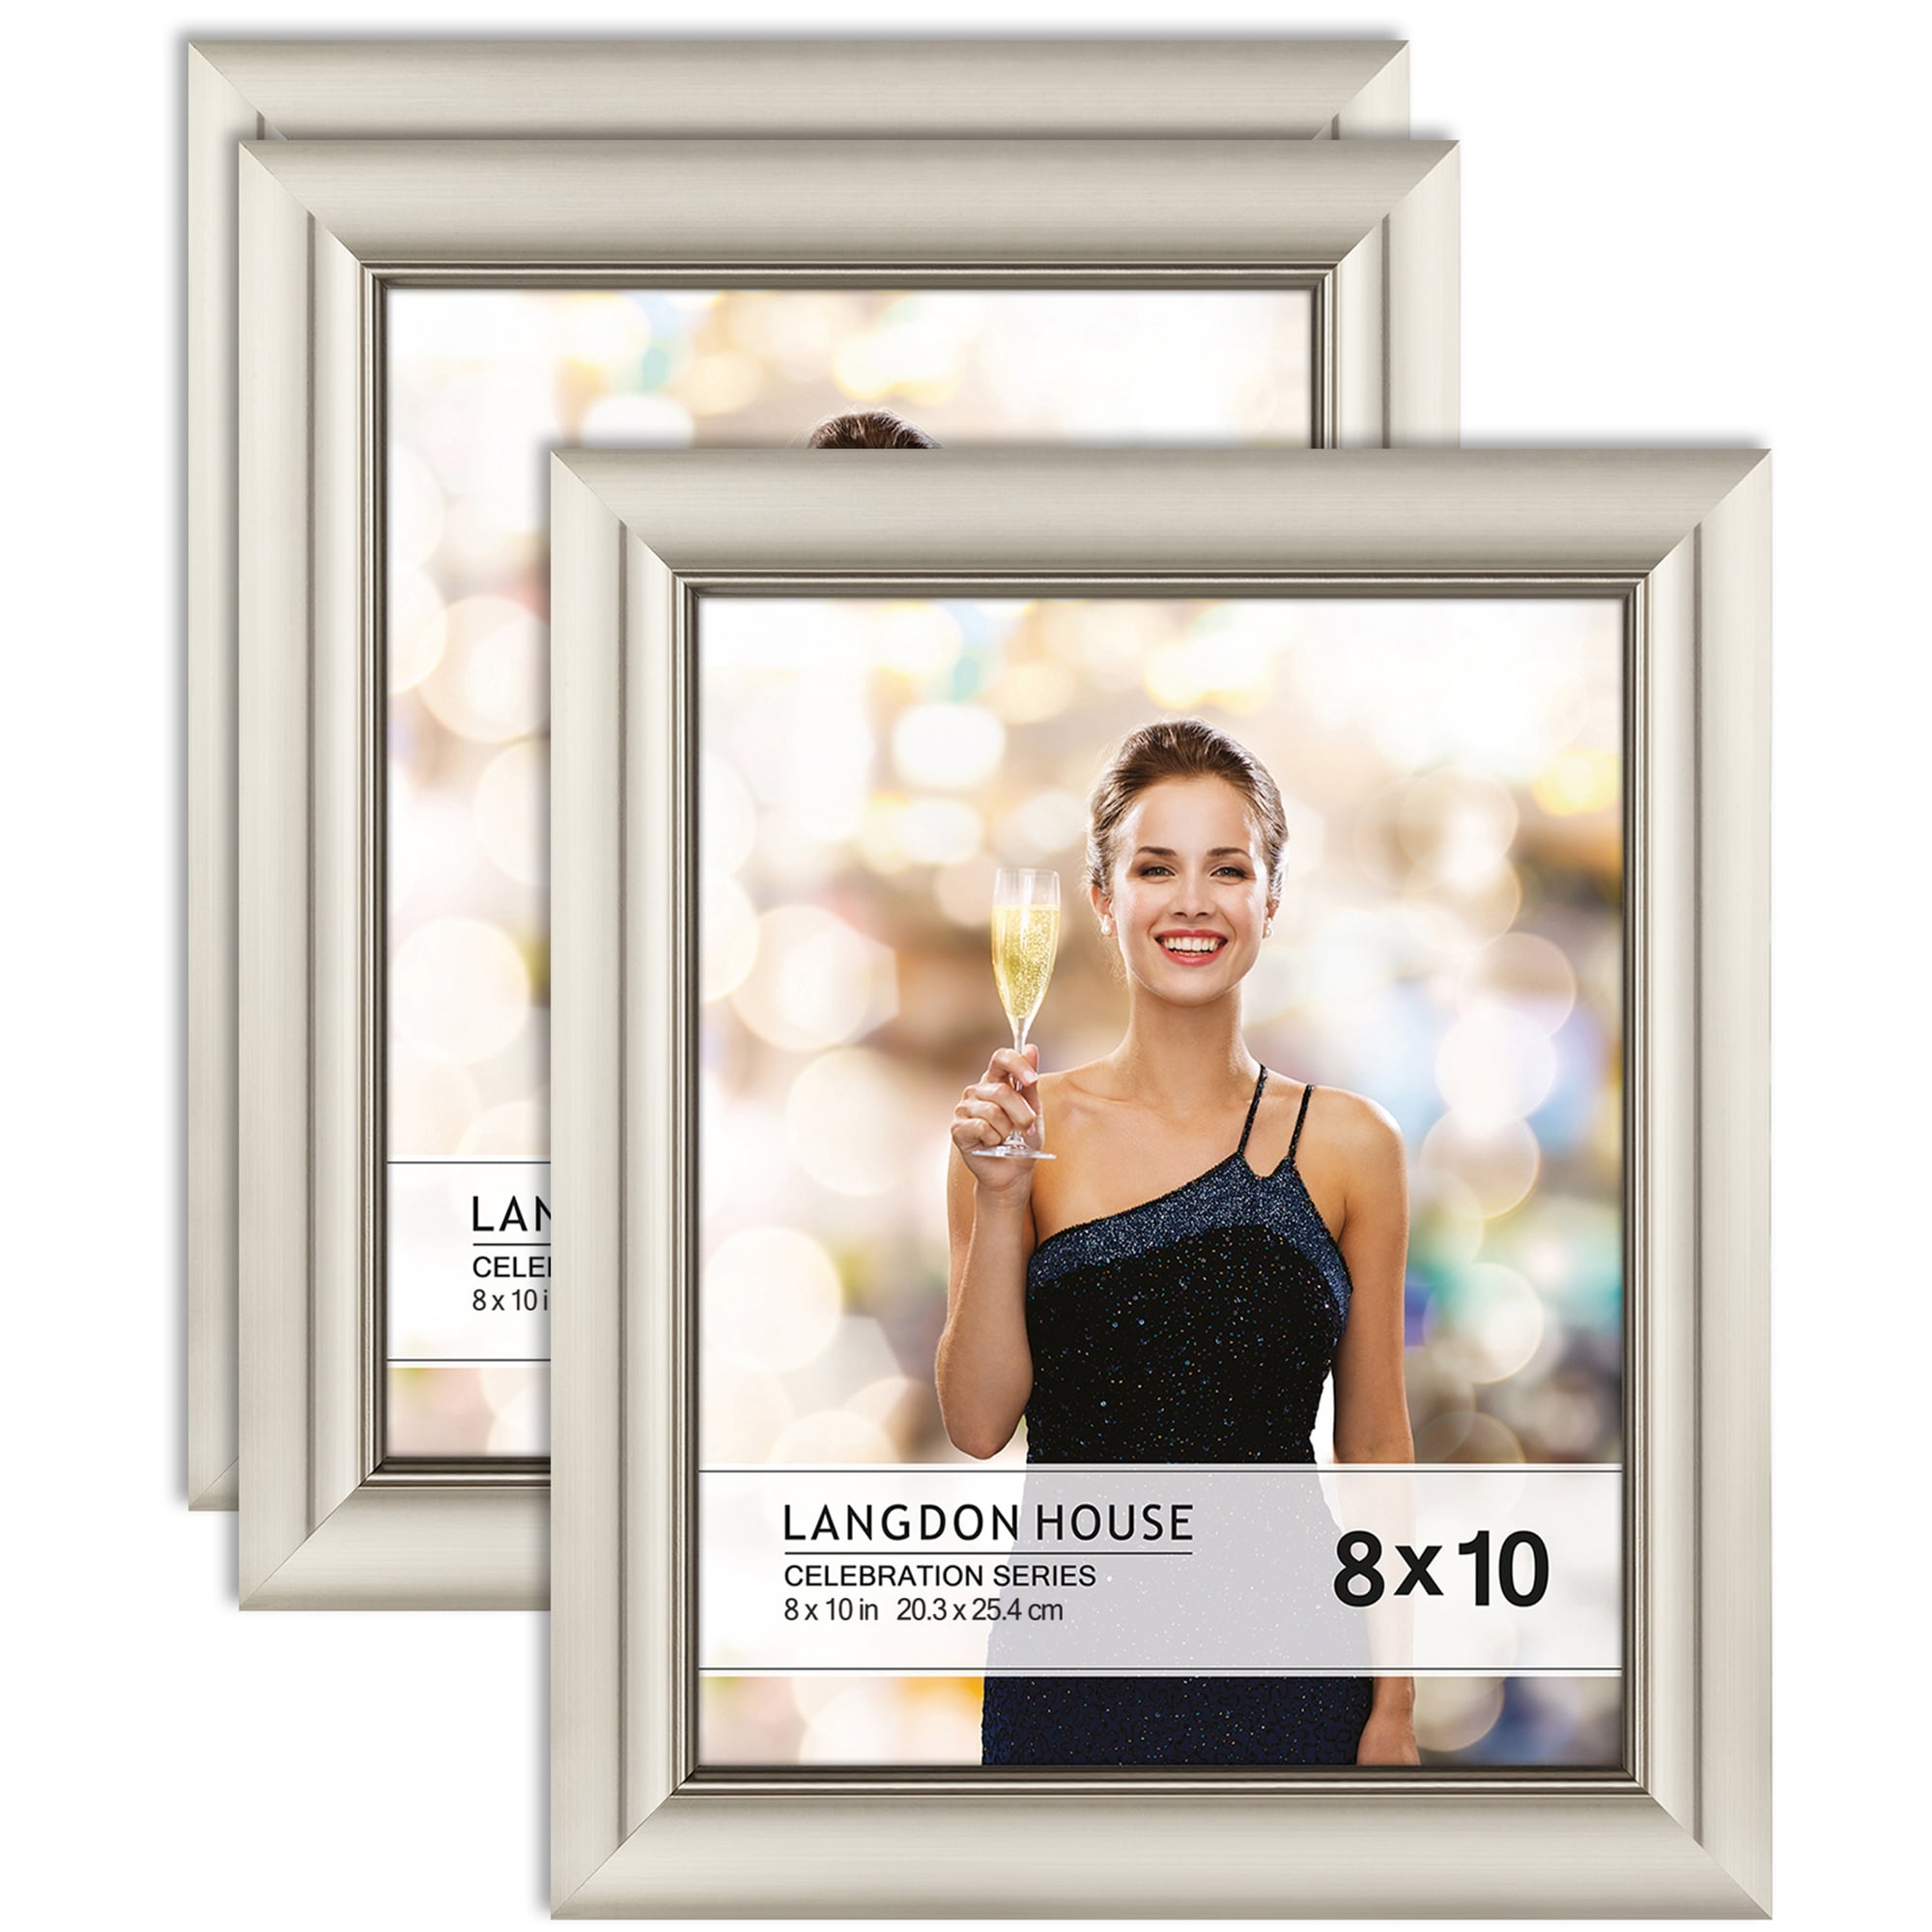 Langdon House Seaside Picture Frames Sturdy Wood Composite Country Style 